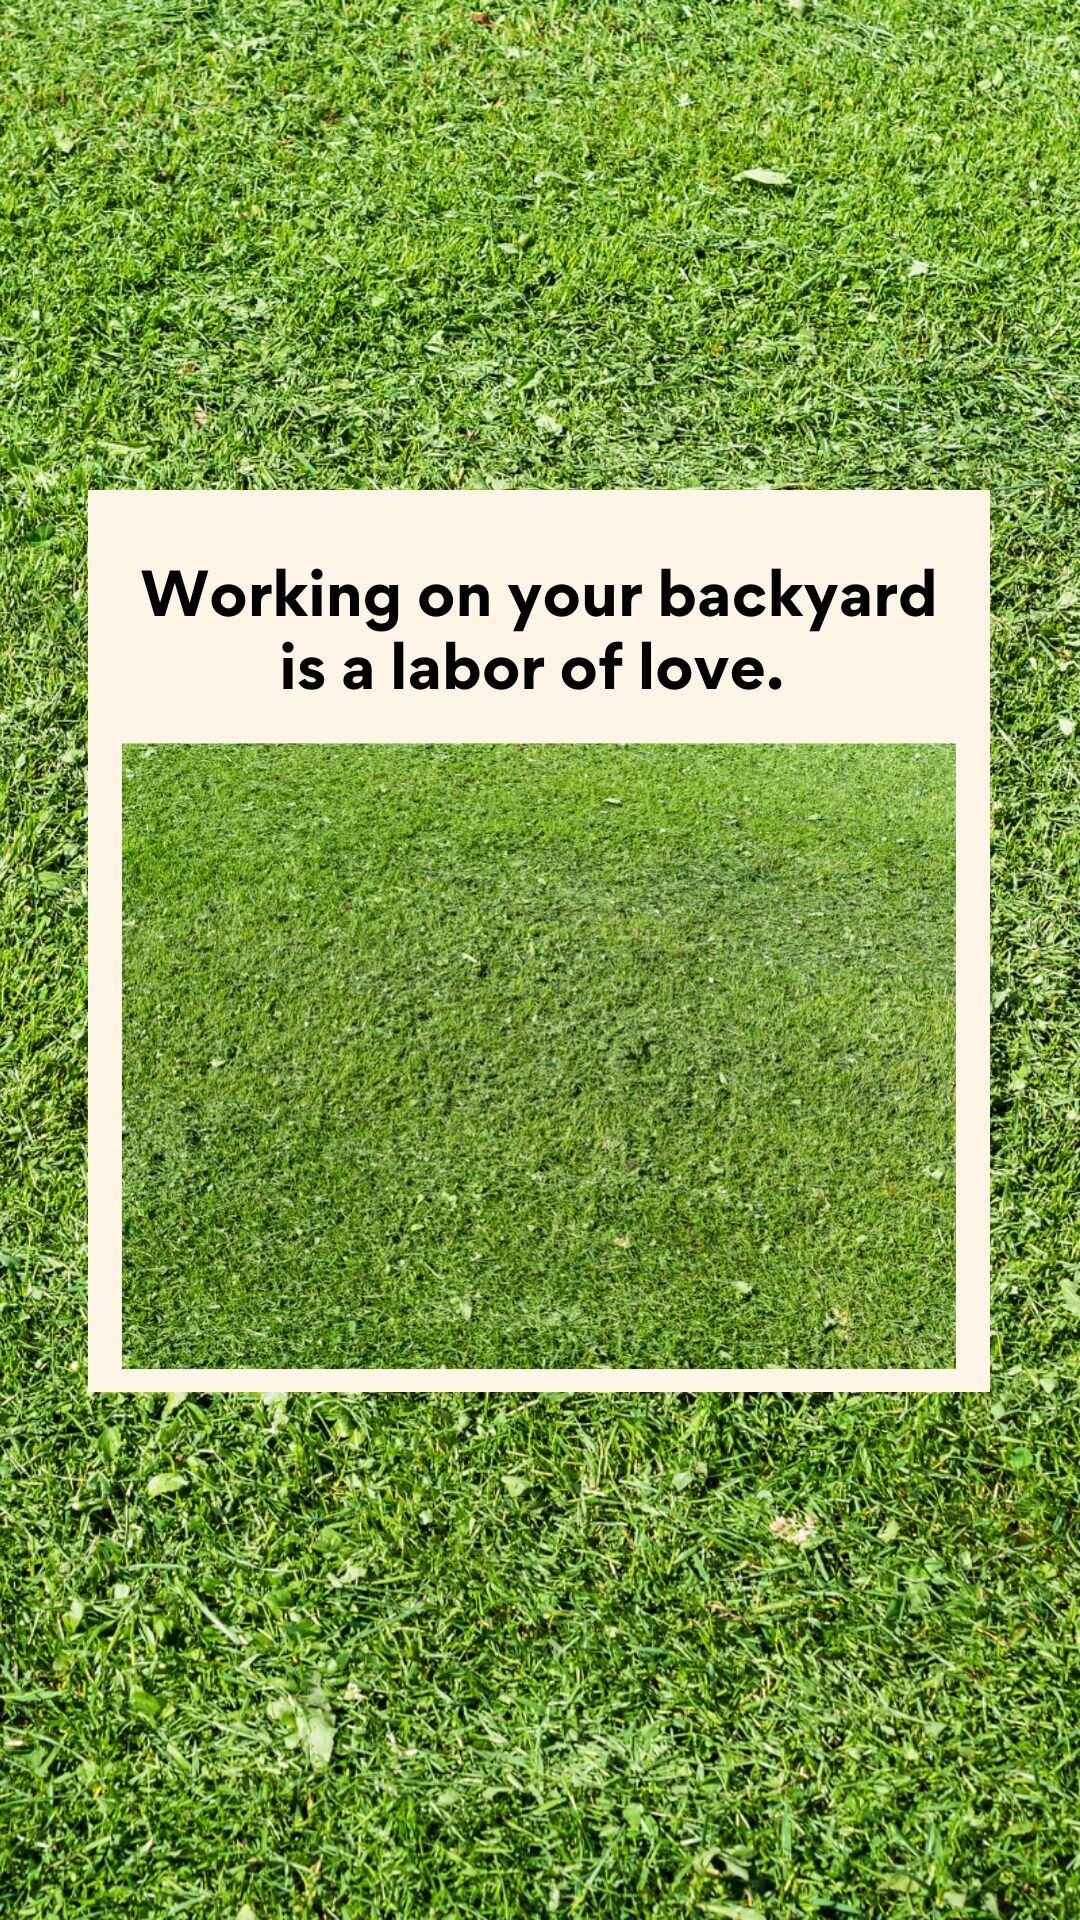 Working on your backyard is a labor of love. 

The smell of the fresh cut grass, the satisfaction of perfectly trimming the bushes, smelling the flowers as you tend the garden&hellip; For us it&rsquo;s almost meditative. 

Which backyard task do you 